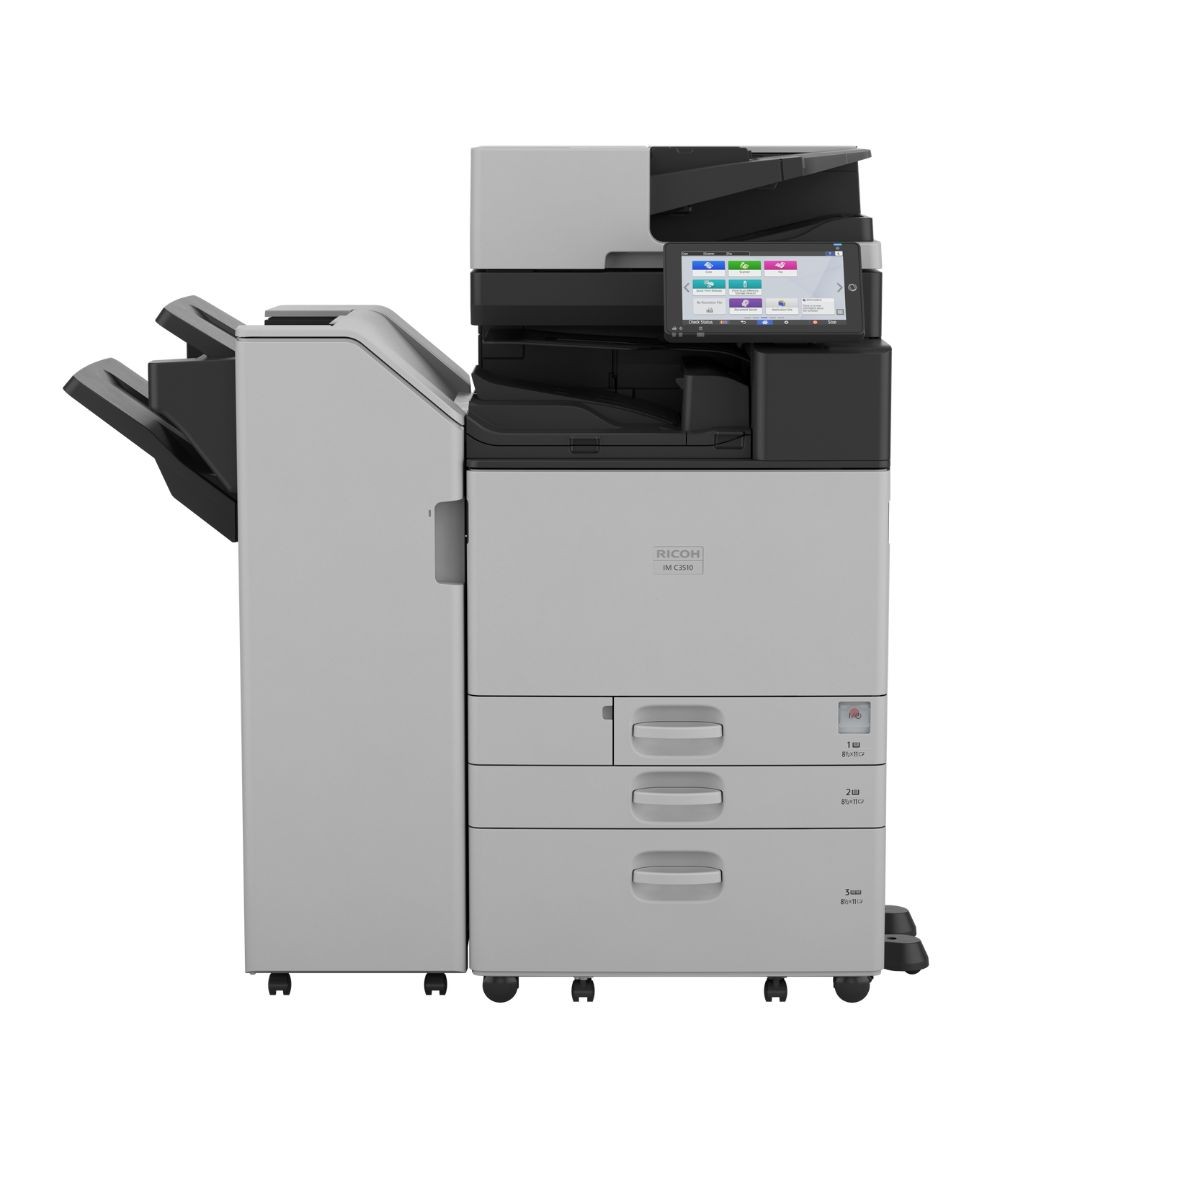 Business Copier and Printers